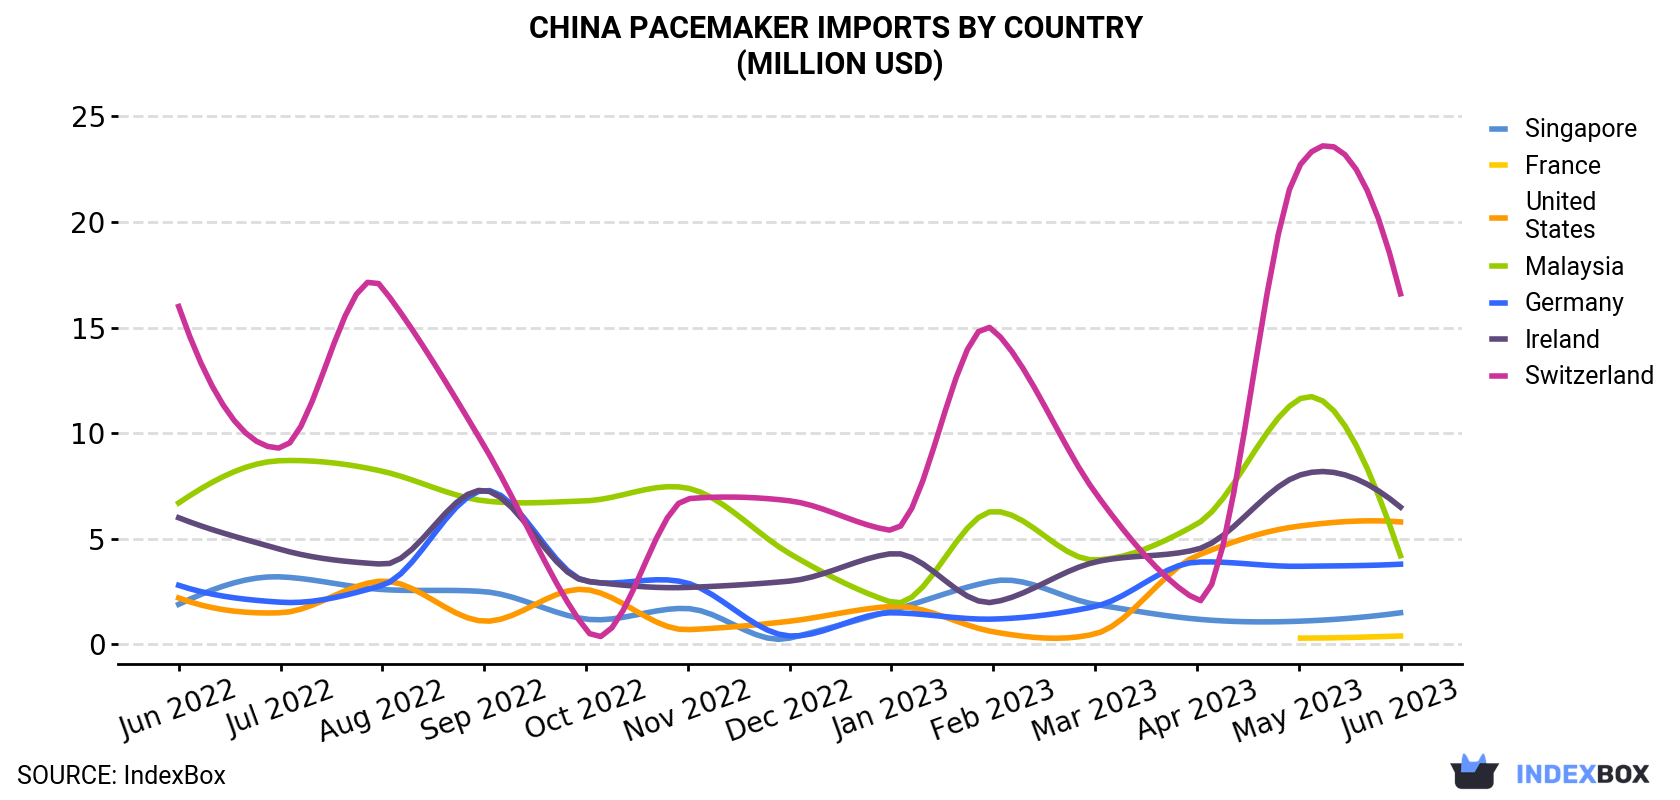 China Pacemaker Imports By Country (Million USD)